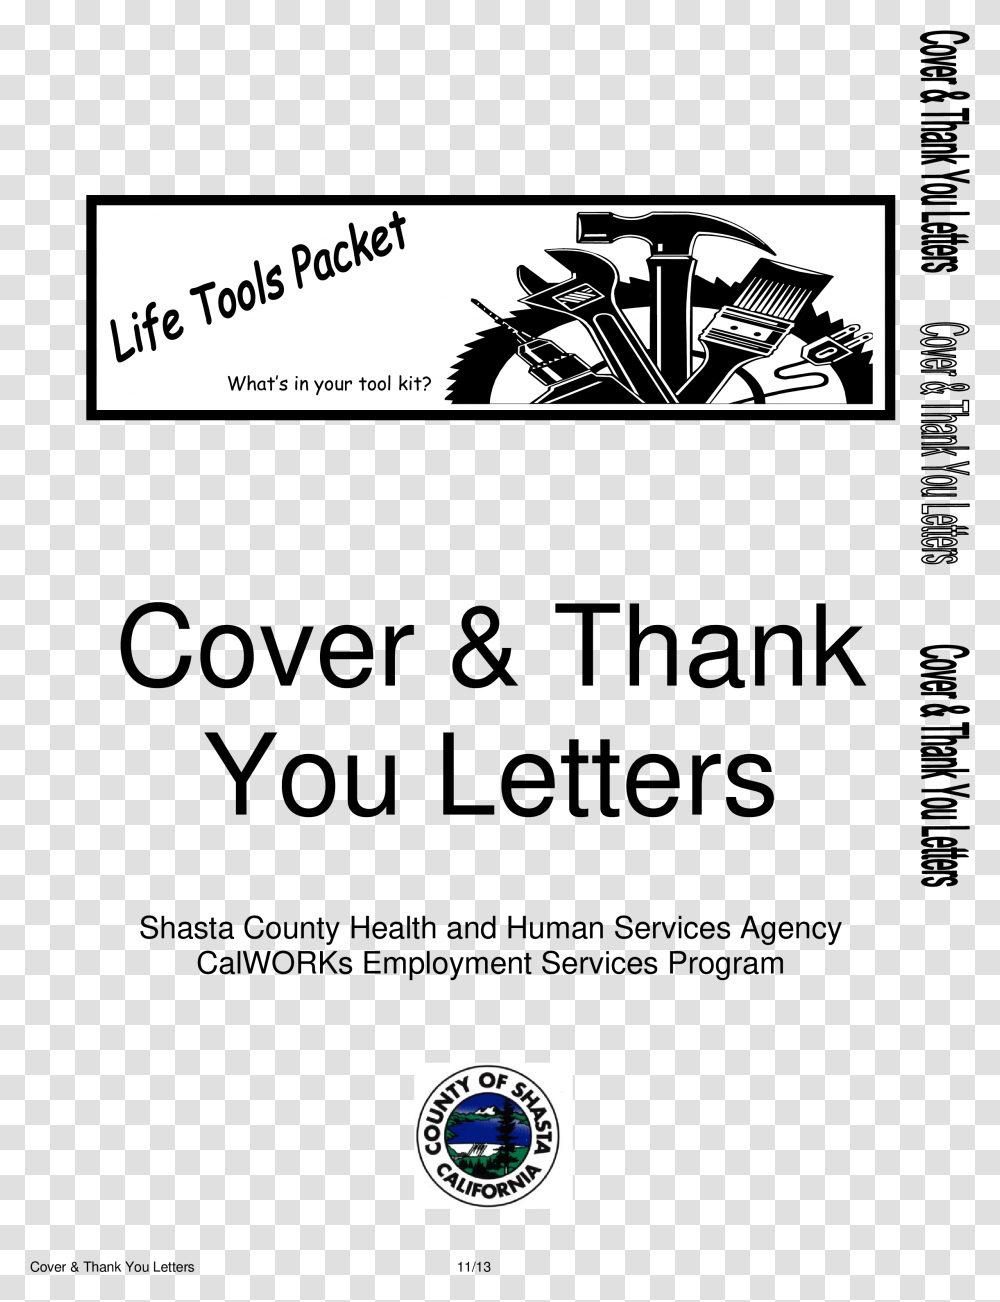 Shasta County Download Types Of Lettering In Drafting, Paddle, Oars, Floral Design Transparent Png